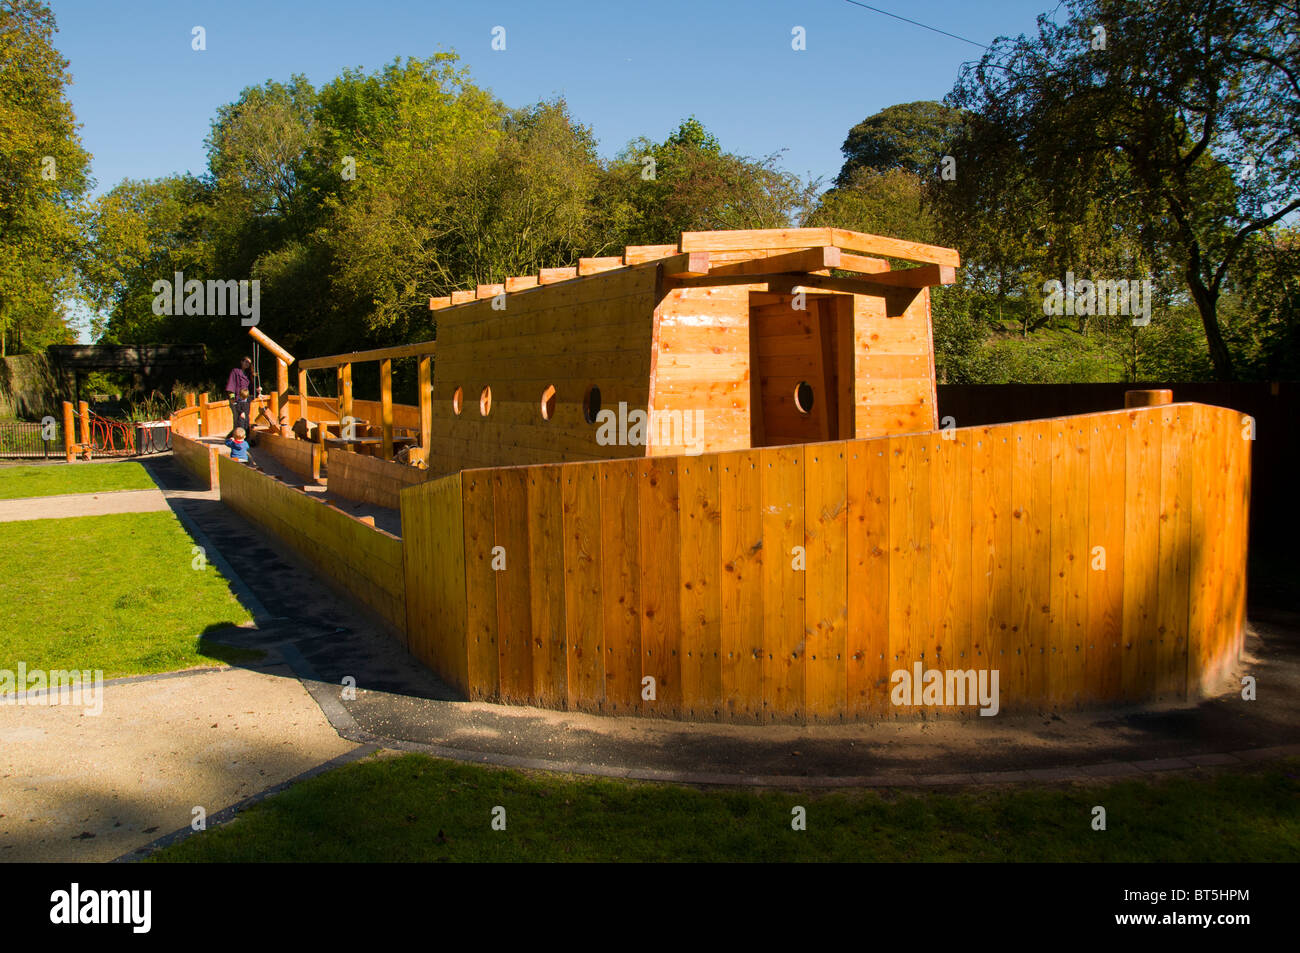 Childrens' sand play area in the shape of a canal narrowboat at Daisy Nook Country Park, Failsworth, Manchester, UK Stock Photo